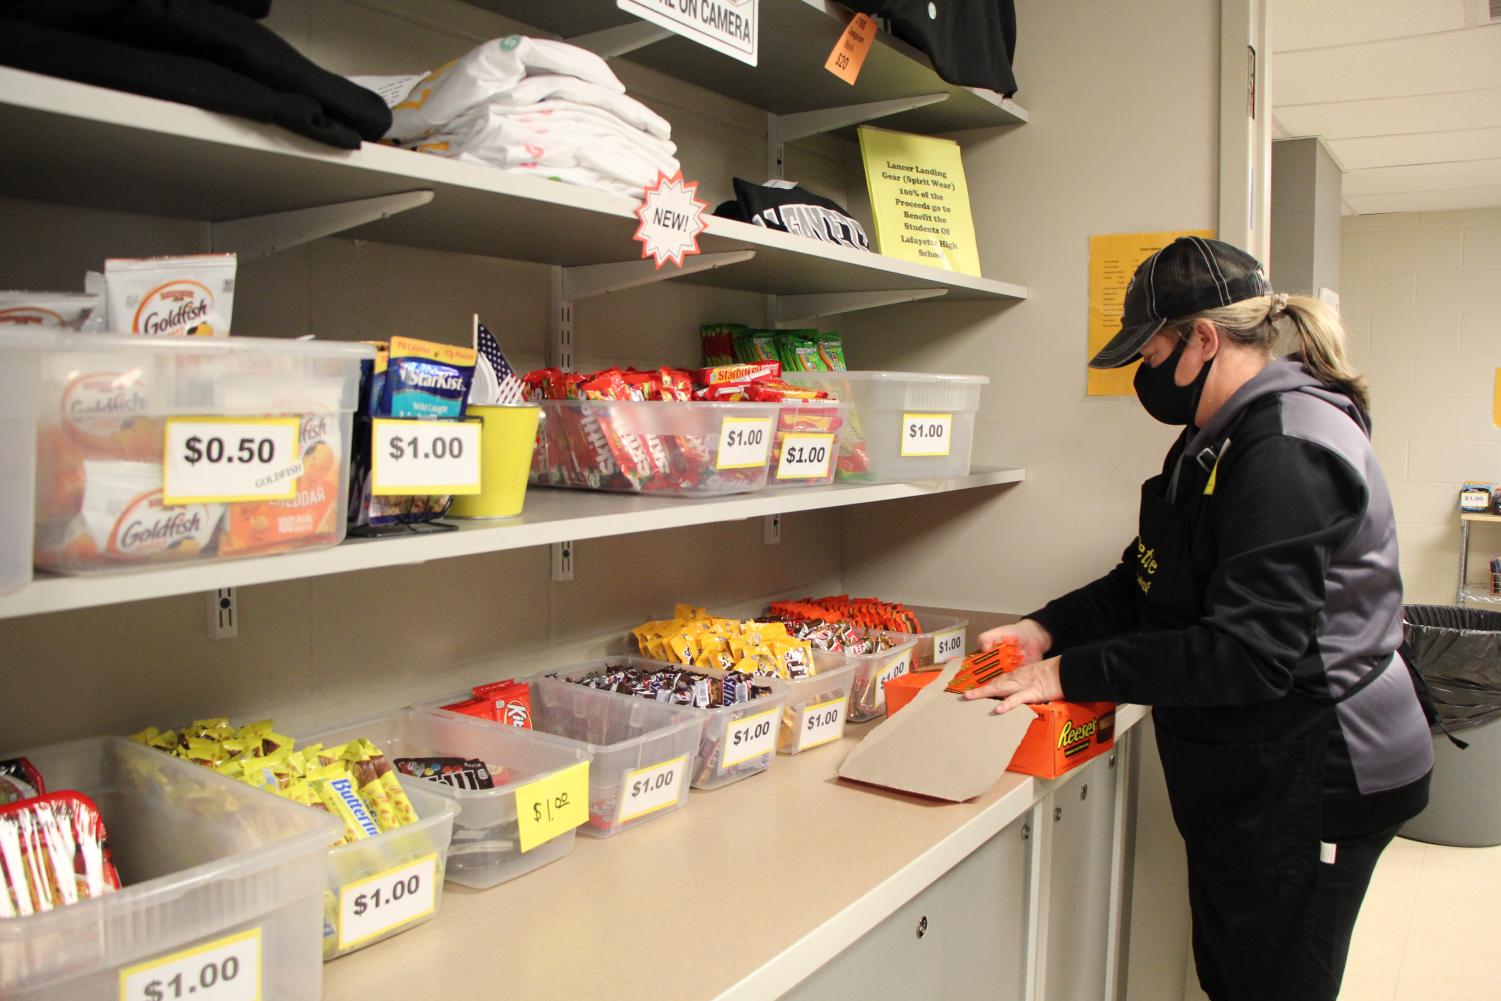 School Store manager Michelle McSpadden restocks food item on the shelves in Lancer Landing during the lunch shifts.  LPO said more volunteers are needed to keep the school store open regularly.